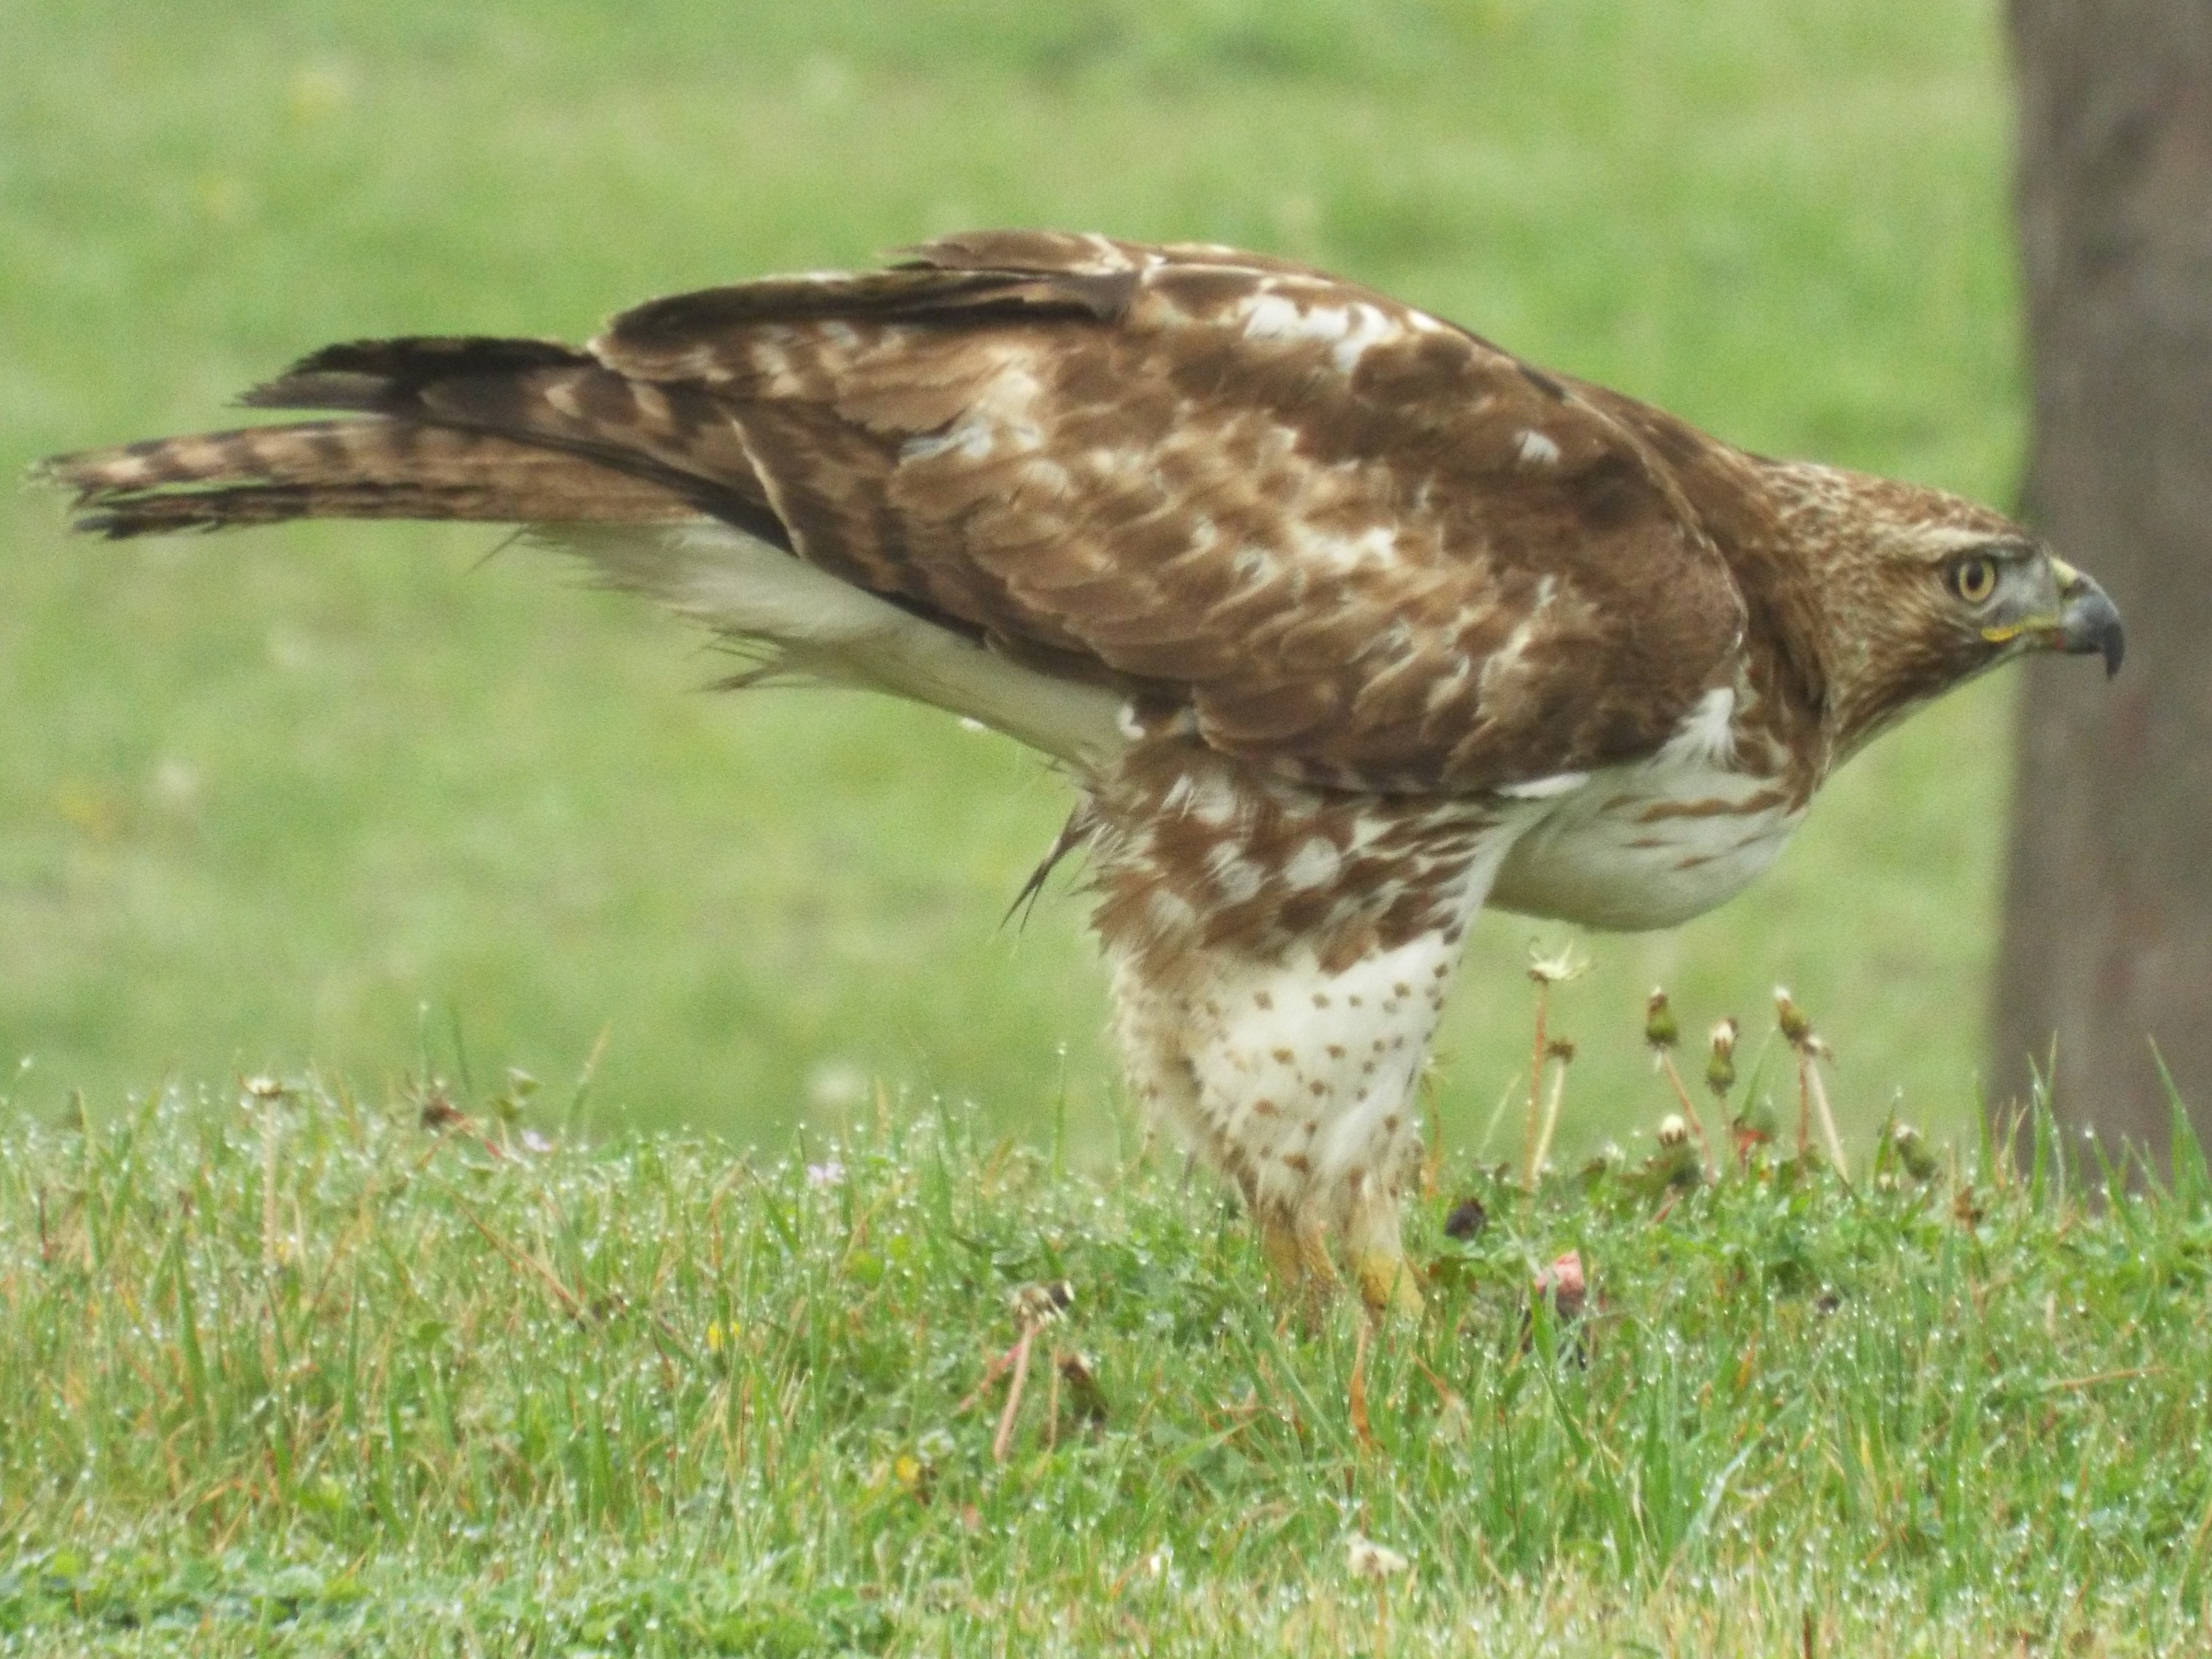 "Red-Tailed Hawk